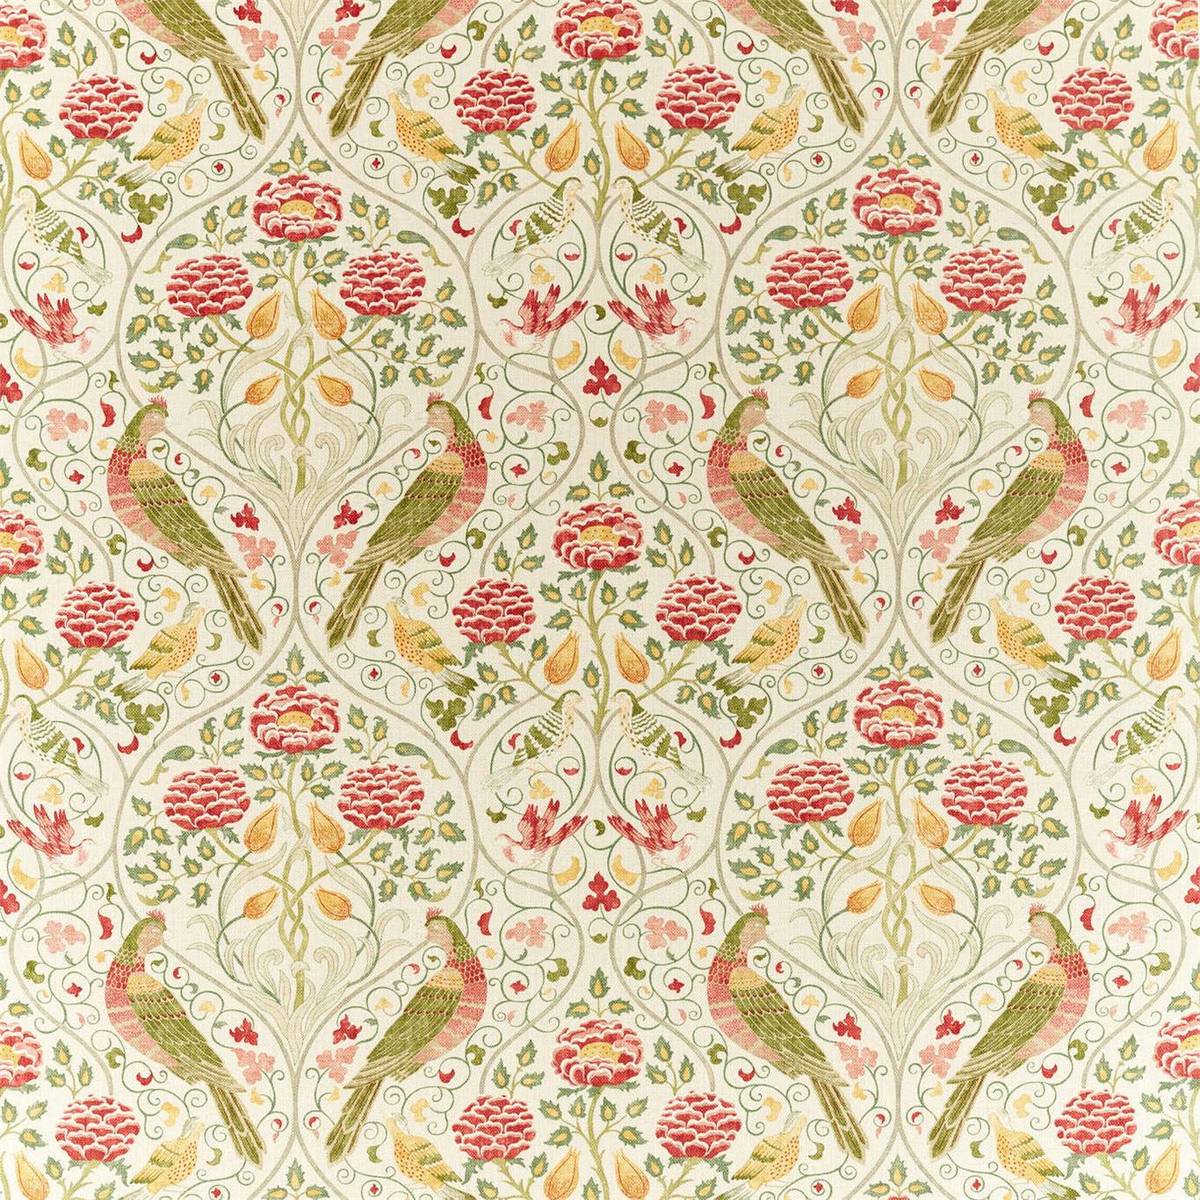 Seasons By May Linen Fabric by William Morris & Co.